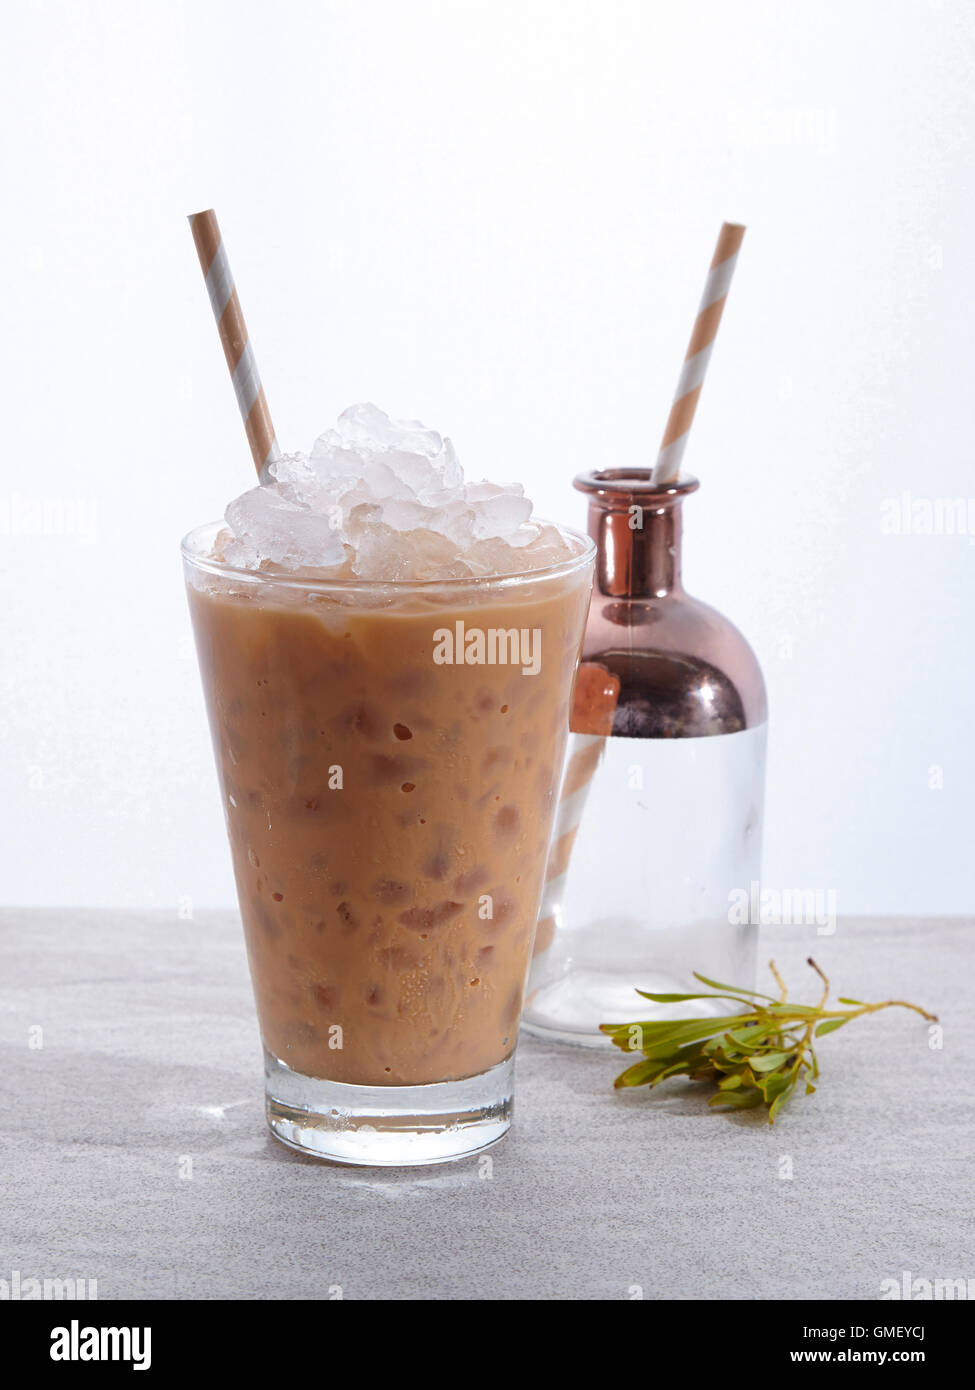 Milk tea refers to any form of beverage found in many cultures, containing some combination of tea and milk. Stock Photo